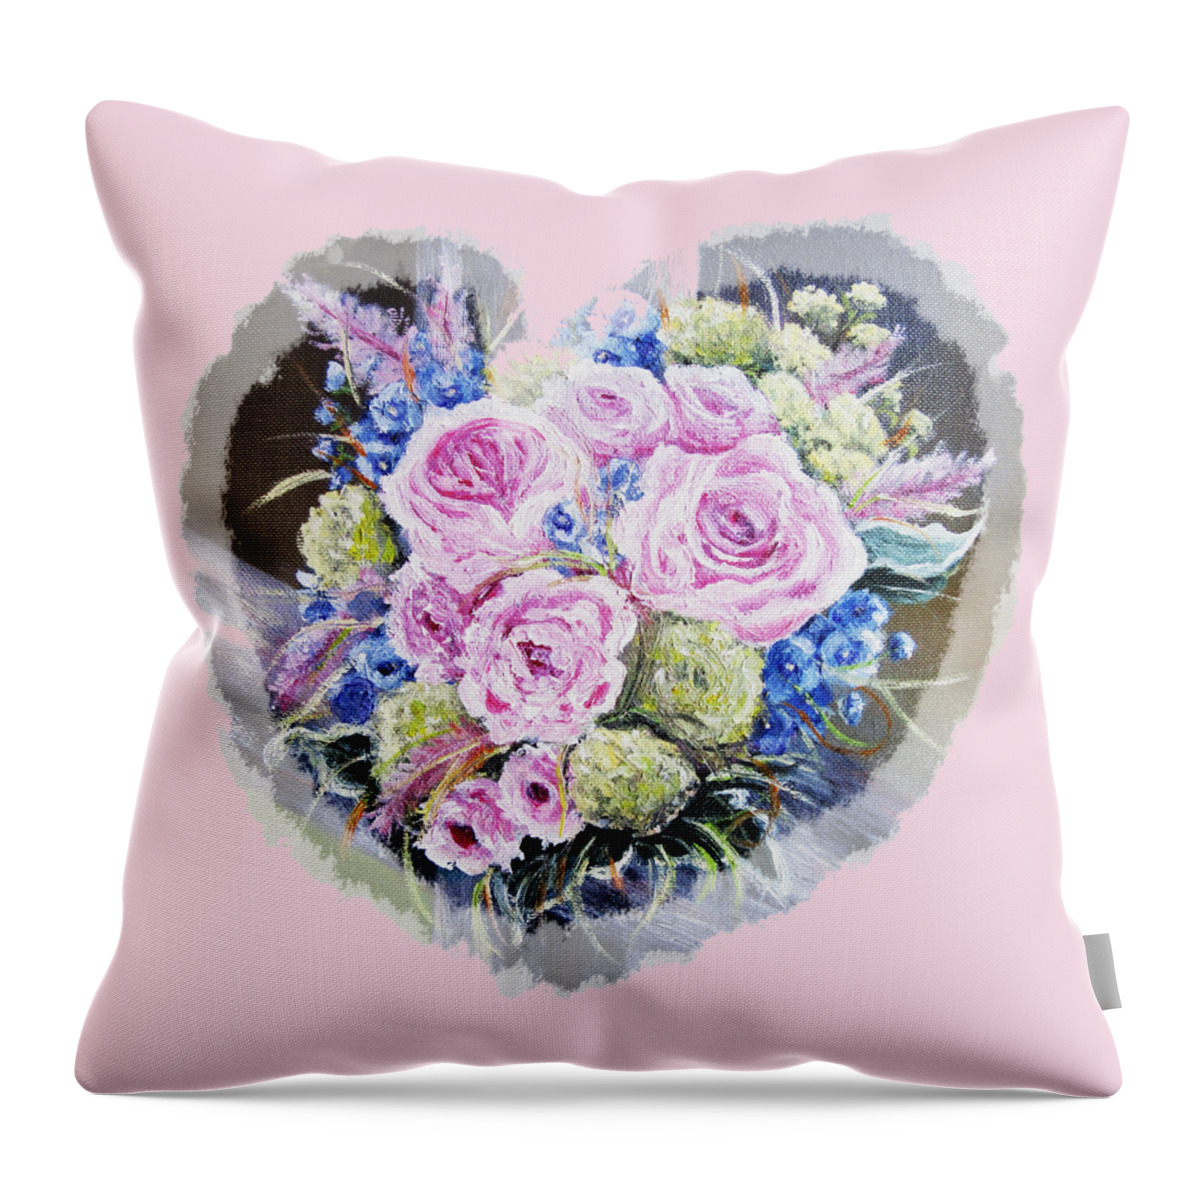  Throw Pillow featuring the painting Heart of rose by Vesna Martinjak